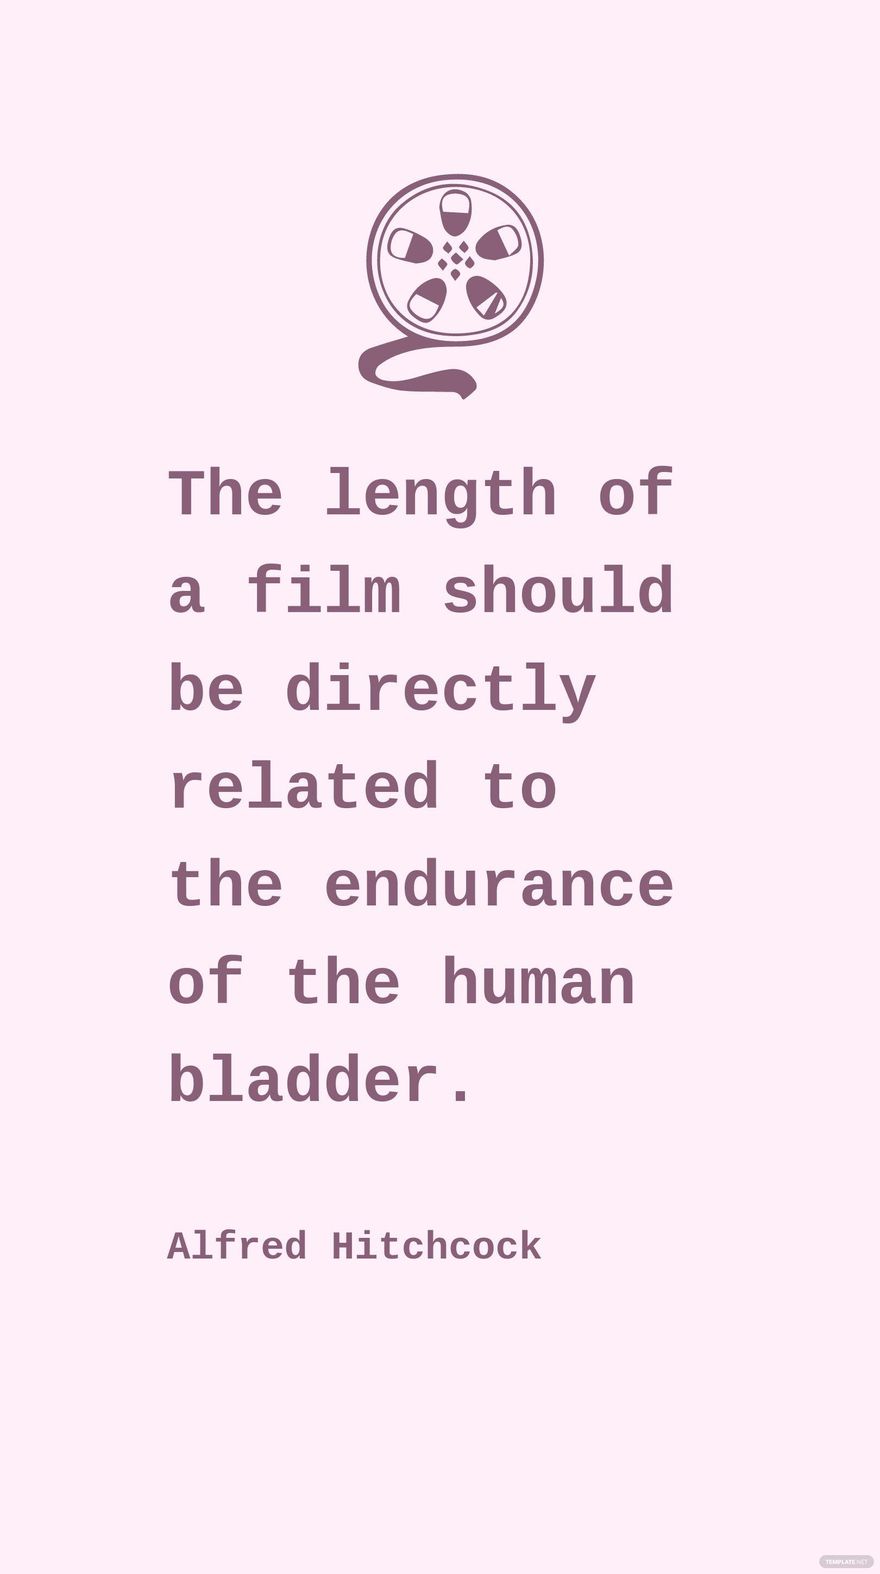 Free Alfred Hitchcock - The length of a film should be directly related to the endurance of the human bladder.